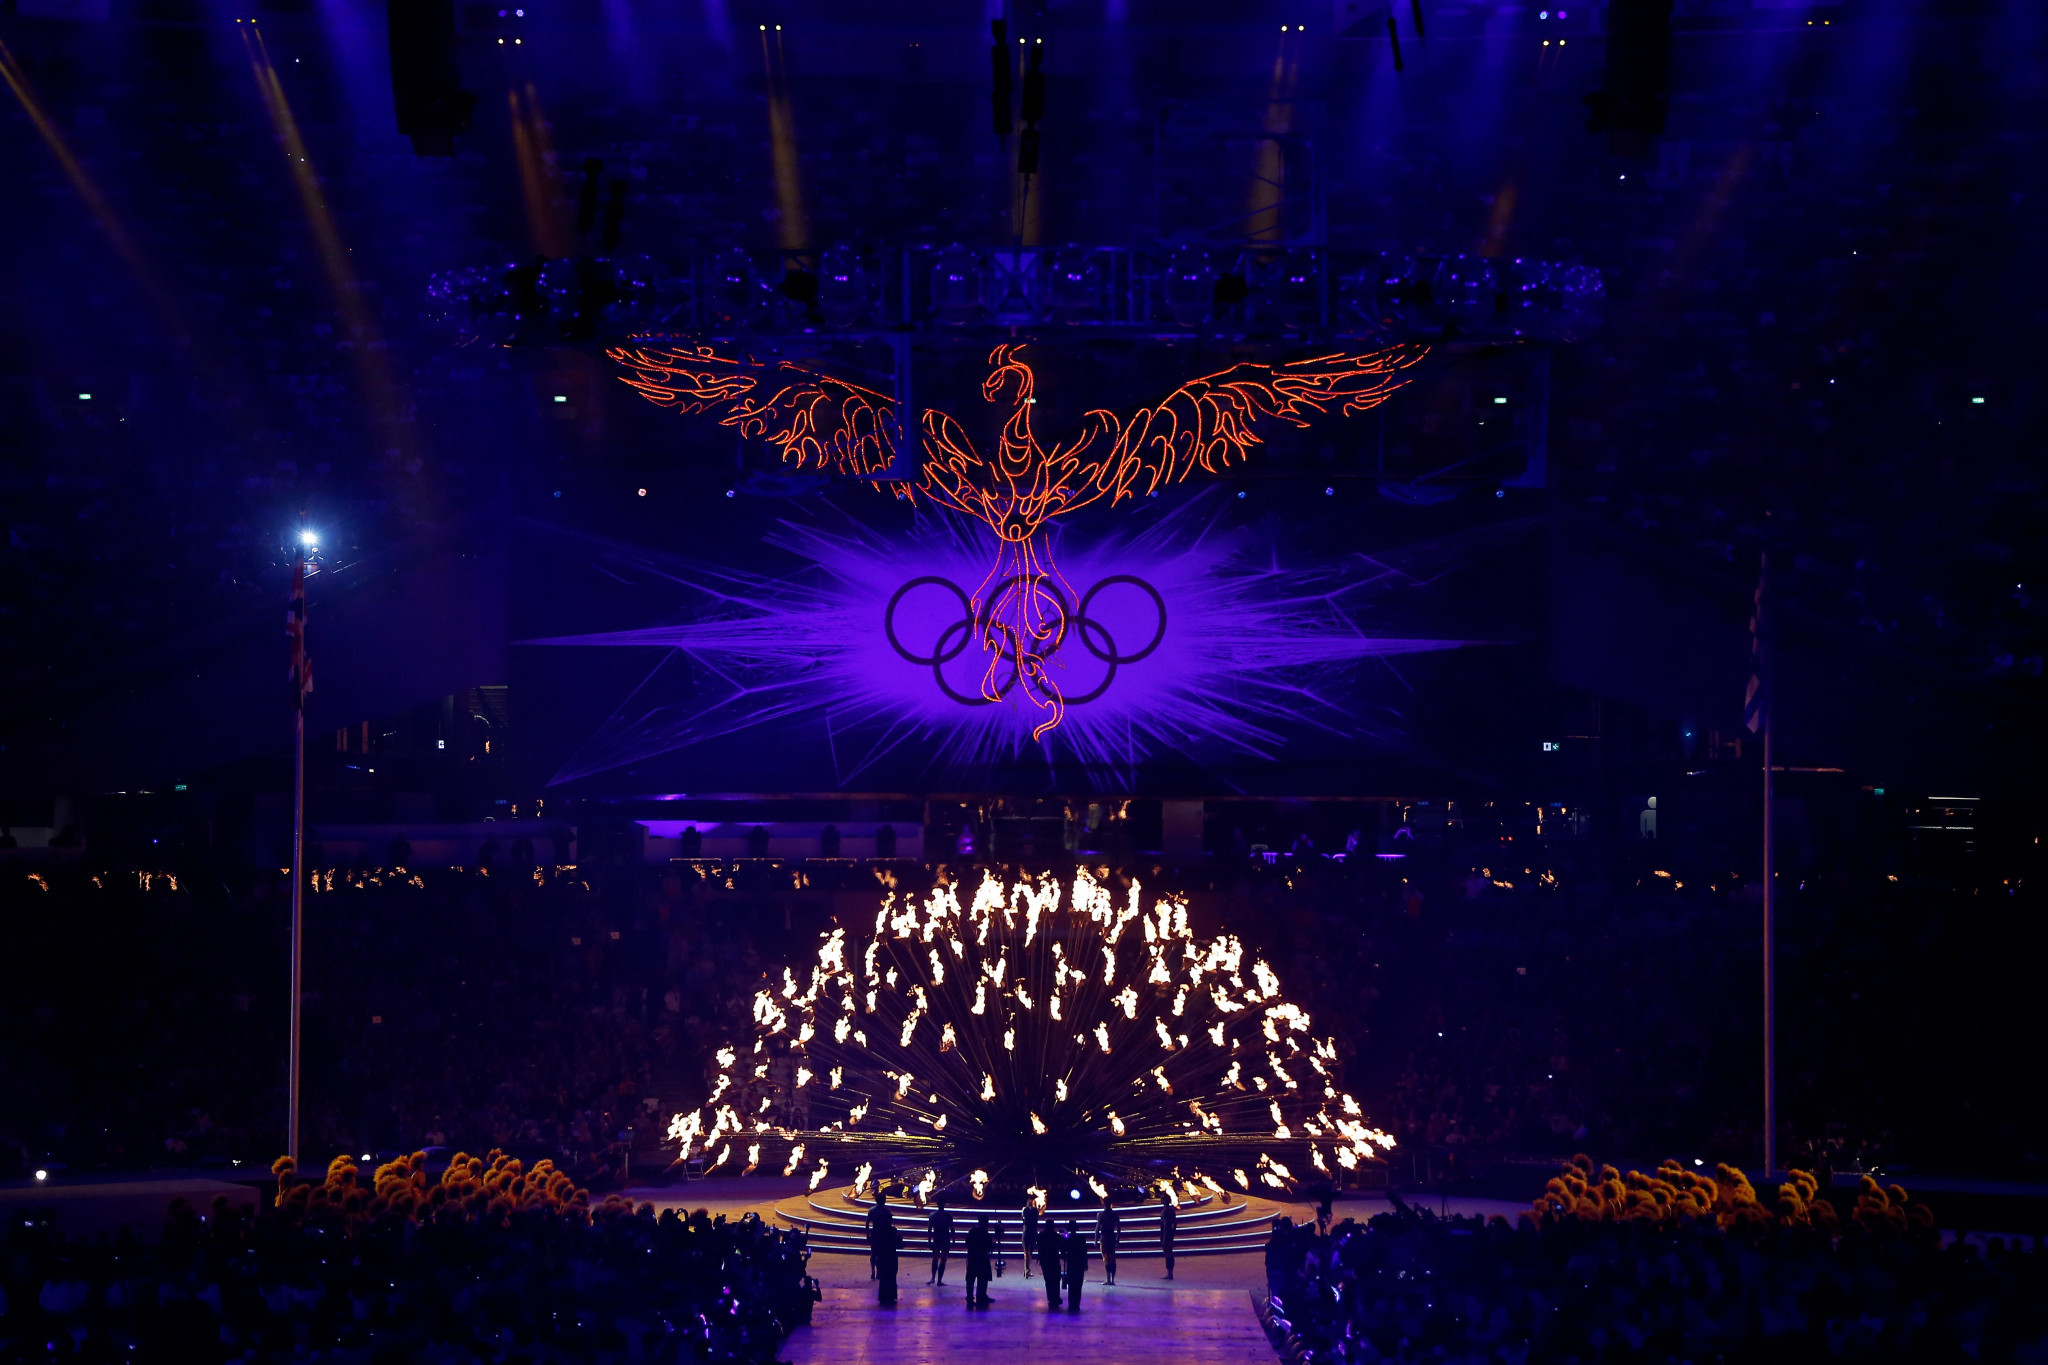 Sadness at London 2012 Closing Ceremony echoes at Birmingham 2022 ten years later